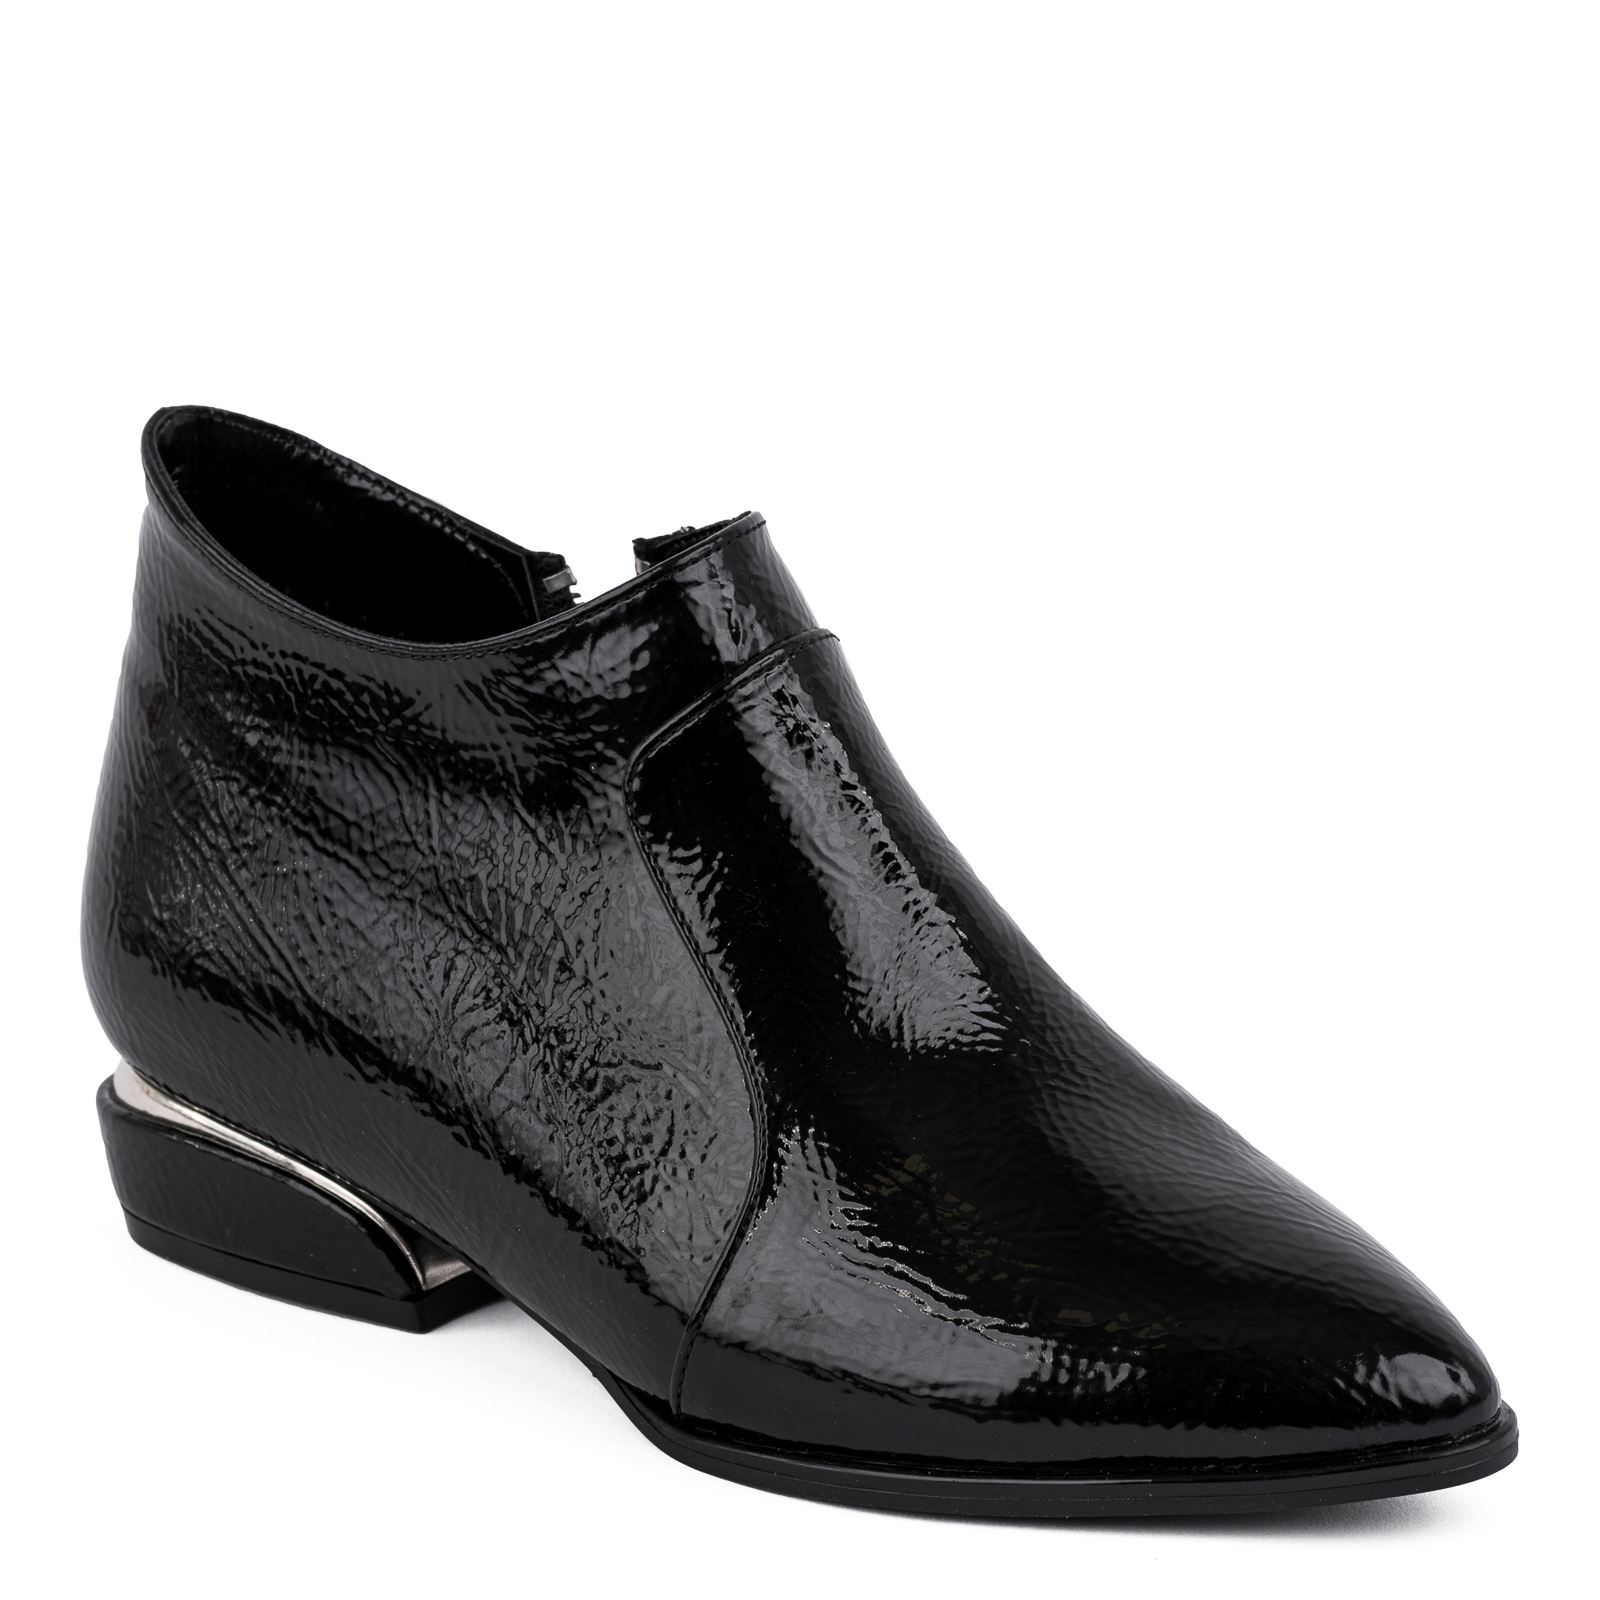 PATENT POINTED DEEP SHOES - BLACK